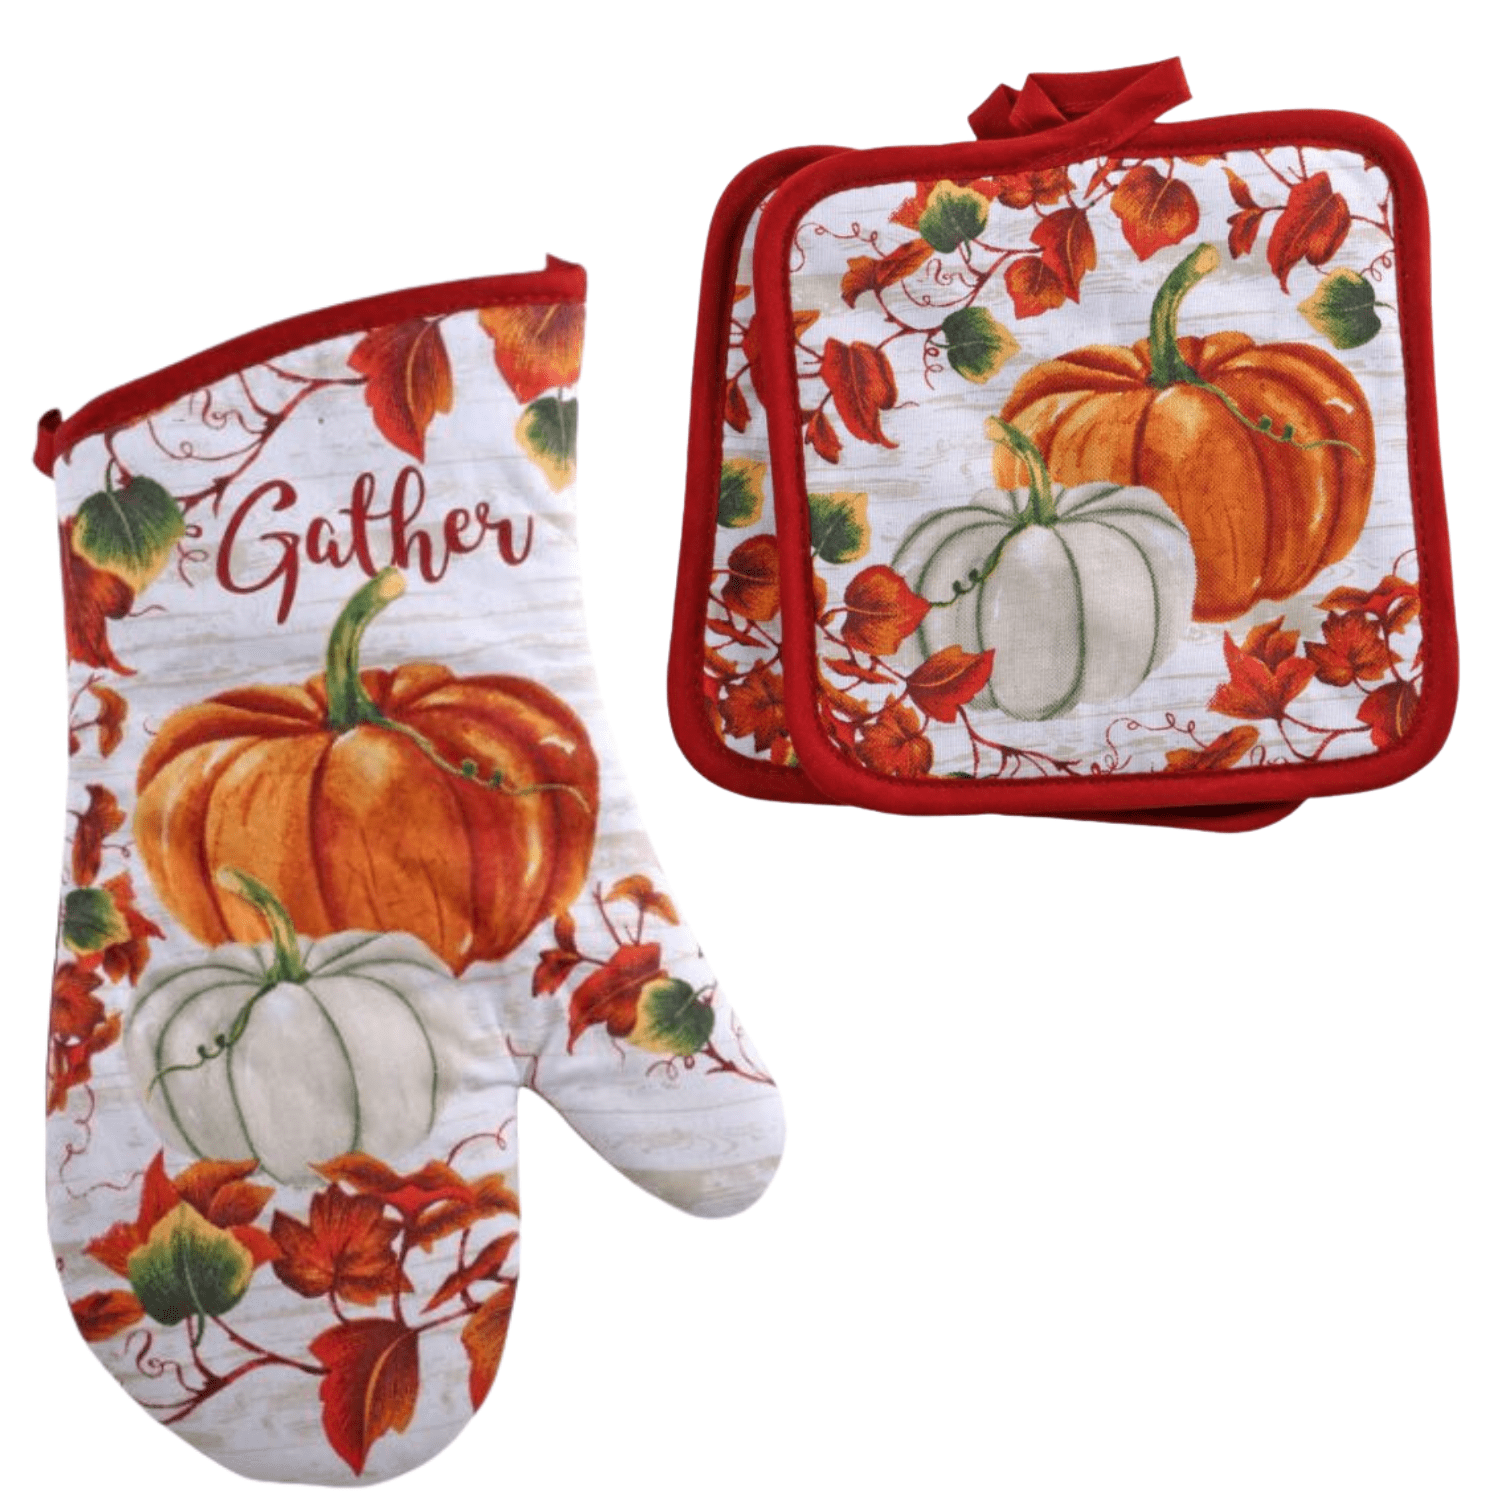 Autumn Turkey Pumpkin Oven Mitts and Pot Holders Sets of 4, Moroccan Boho  Prints Oven Mitts Non-Slip Heat Resistant Cooking Gloves for Kitchen Baking